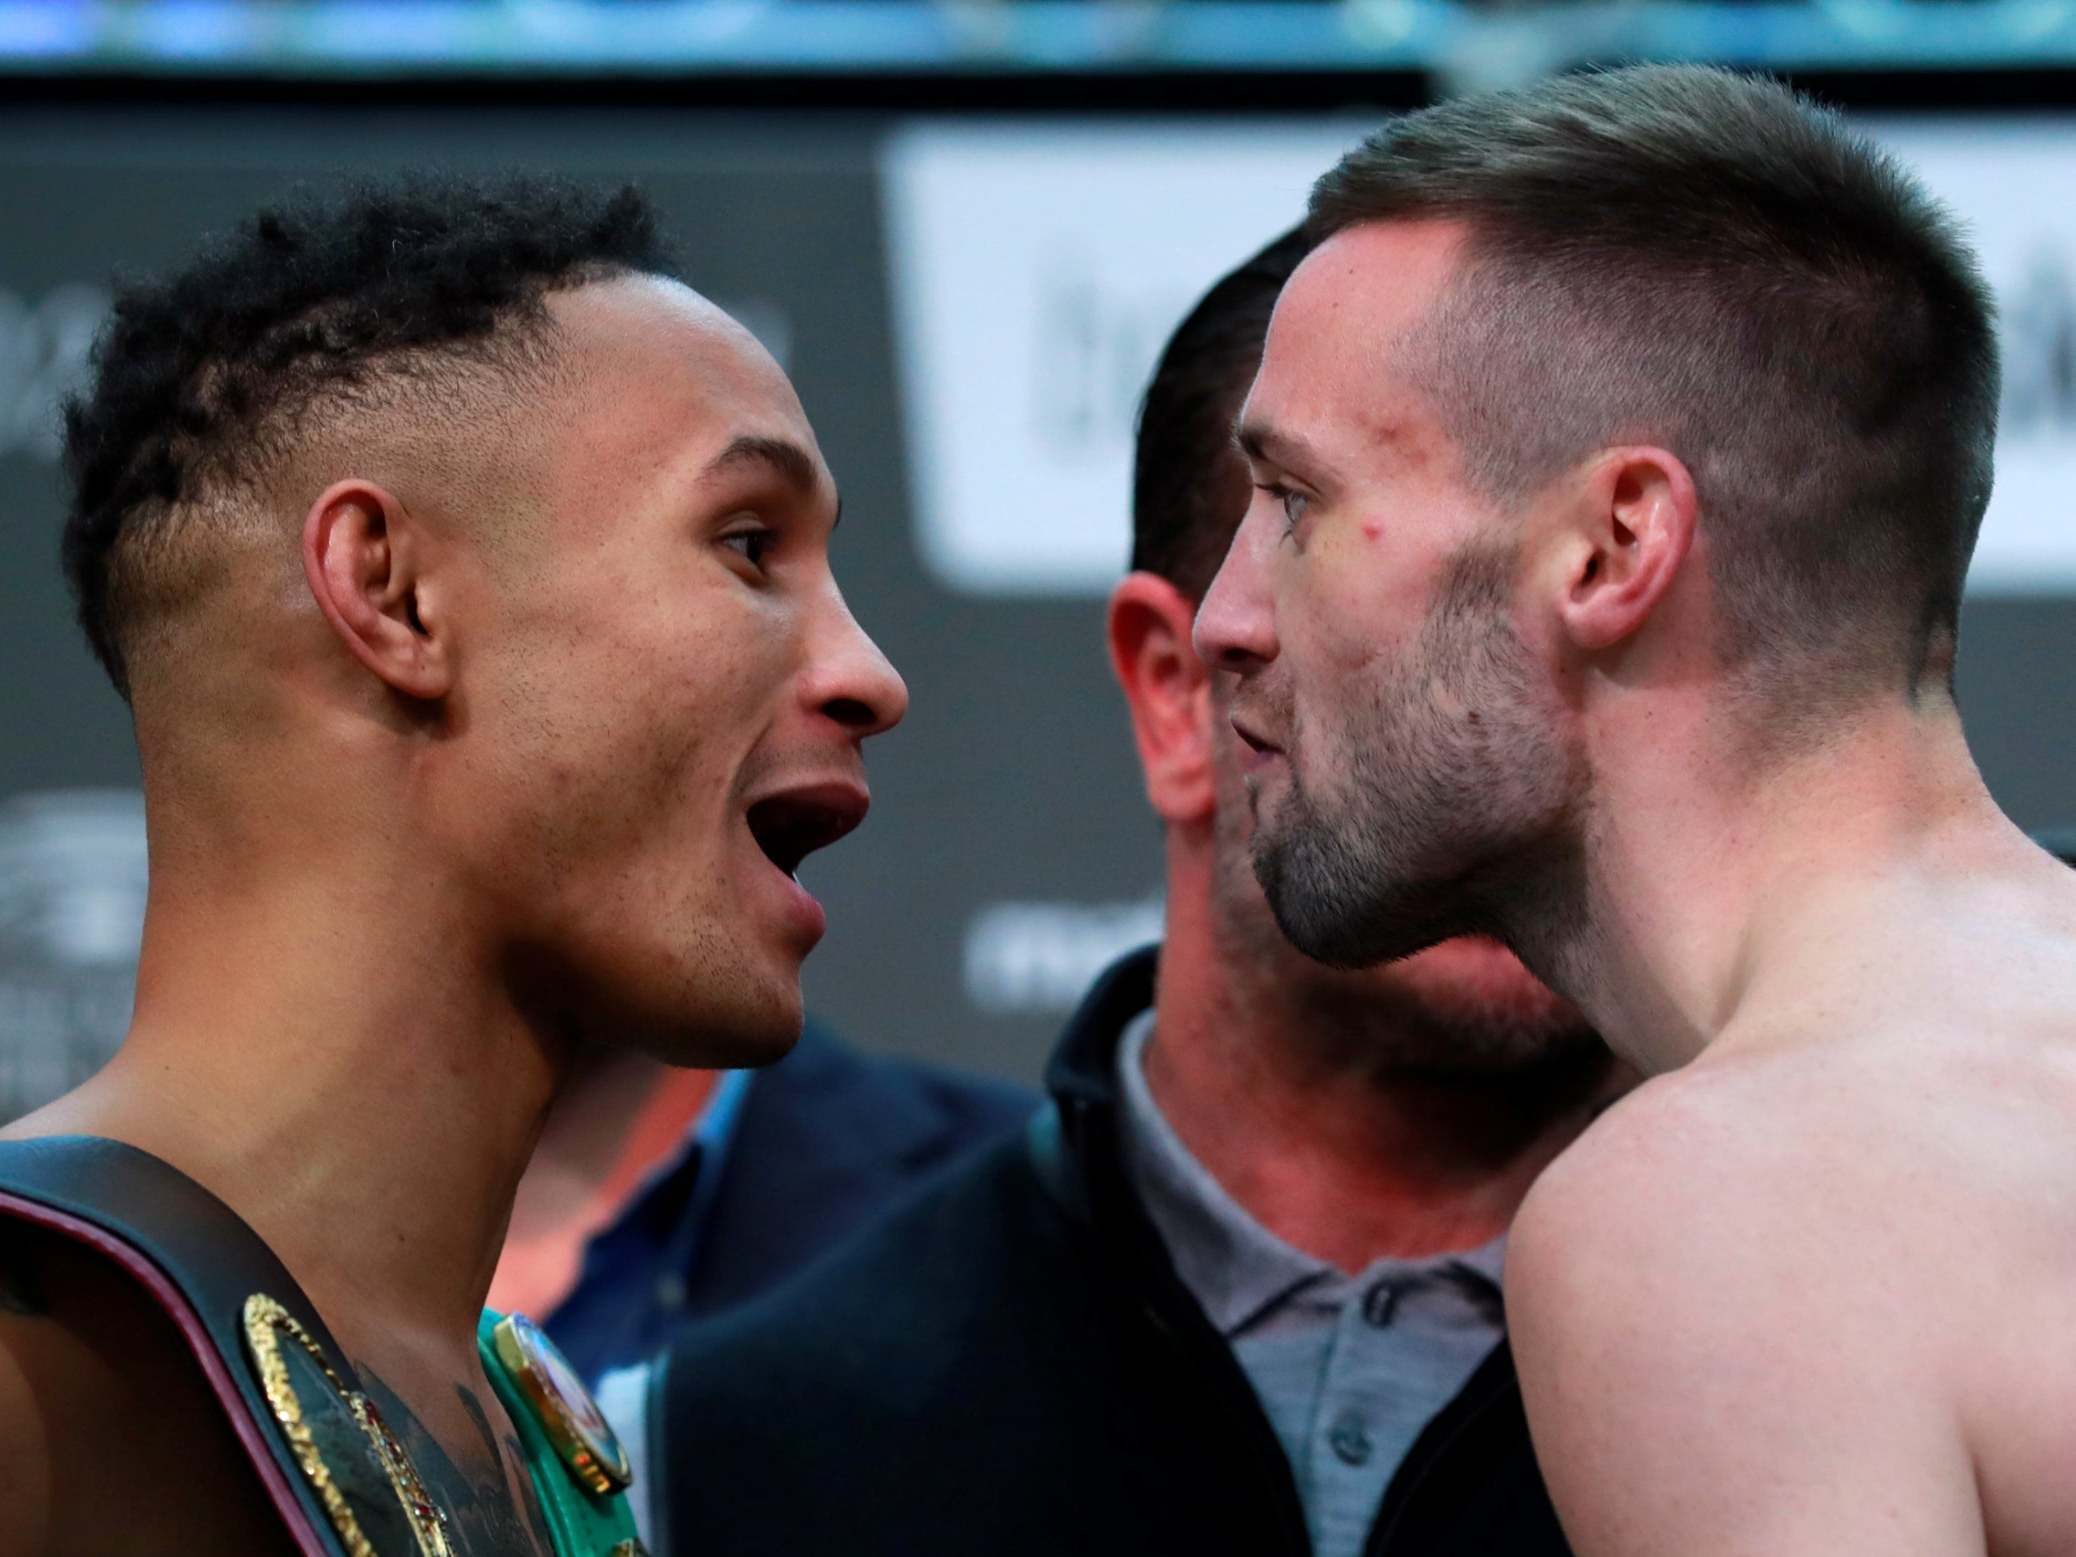 Prograis and Taylor go at it at the face-off